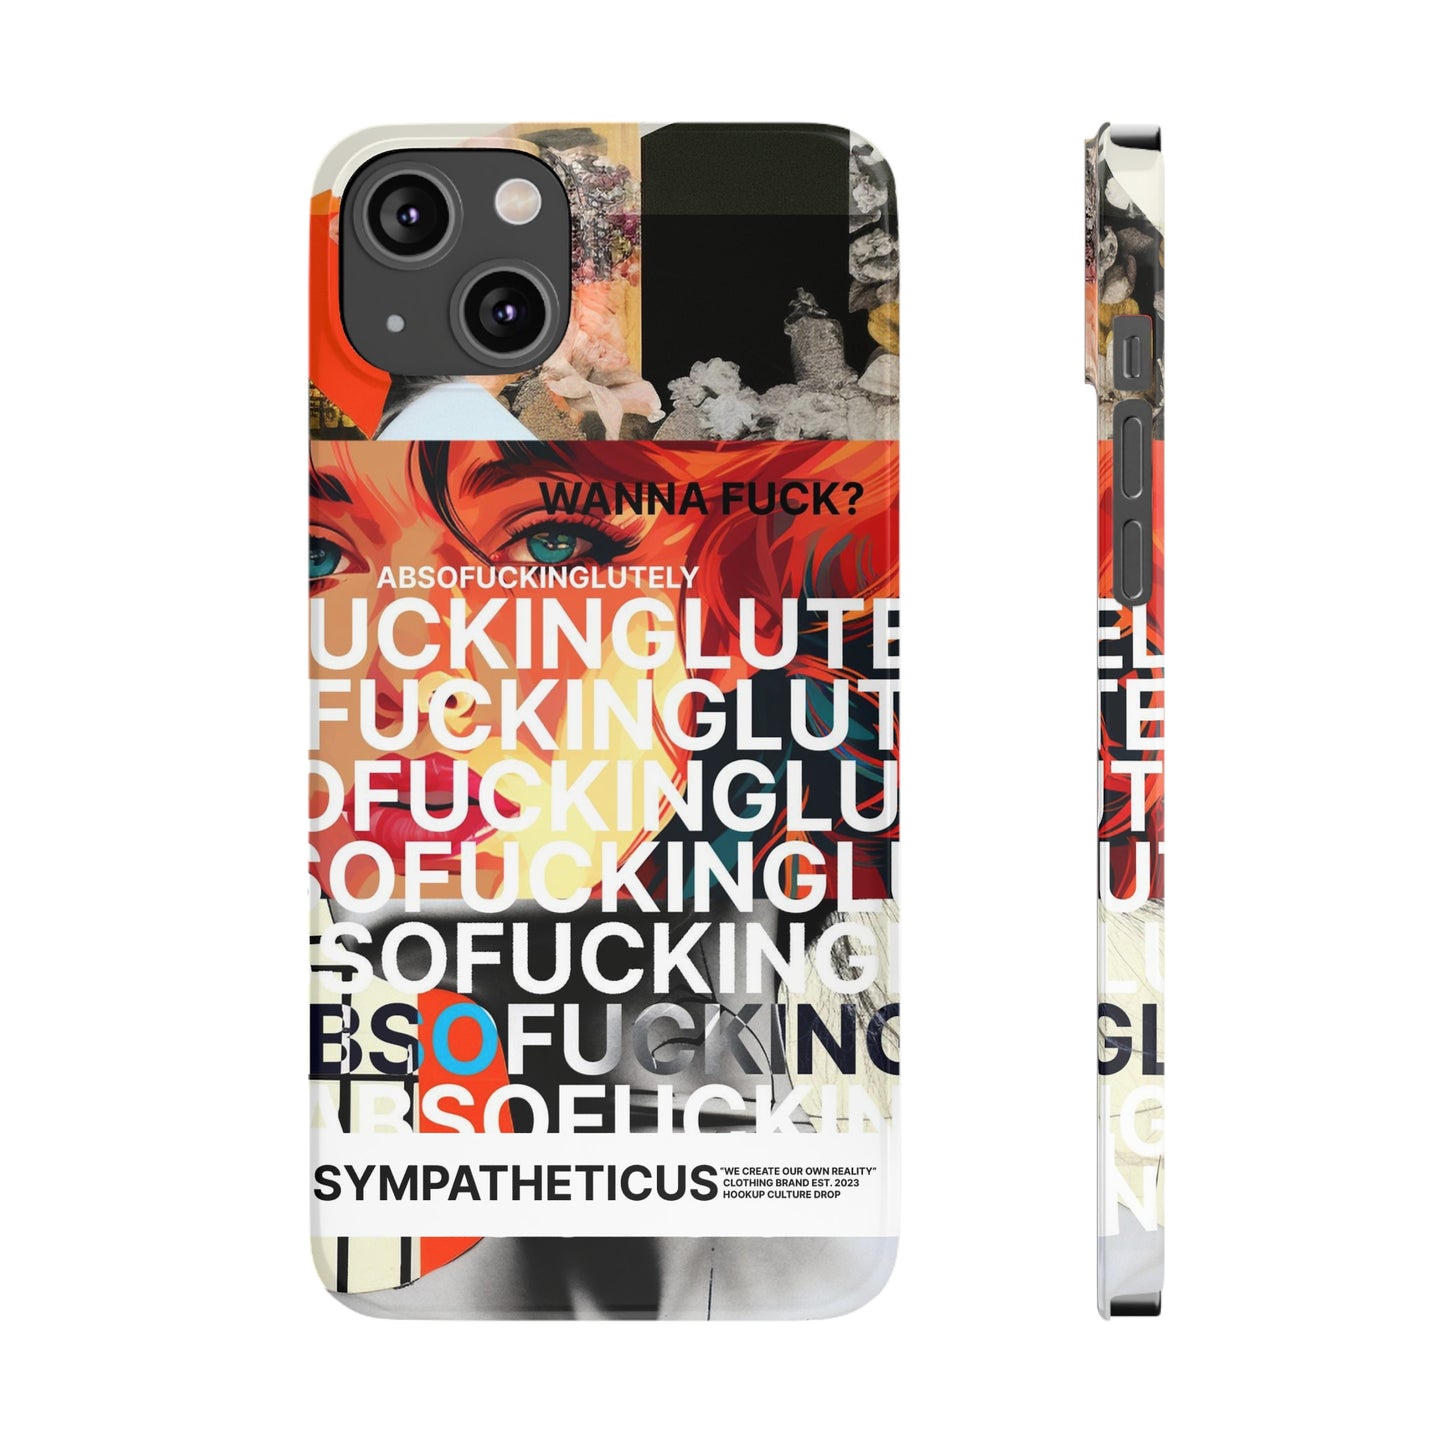 Hookup culture special iphone case-14